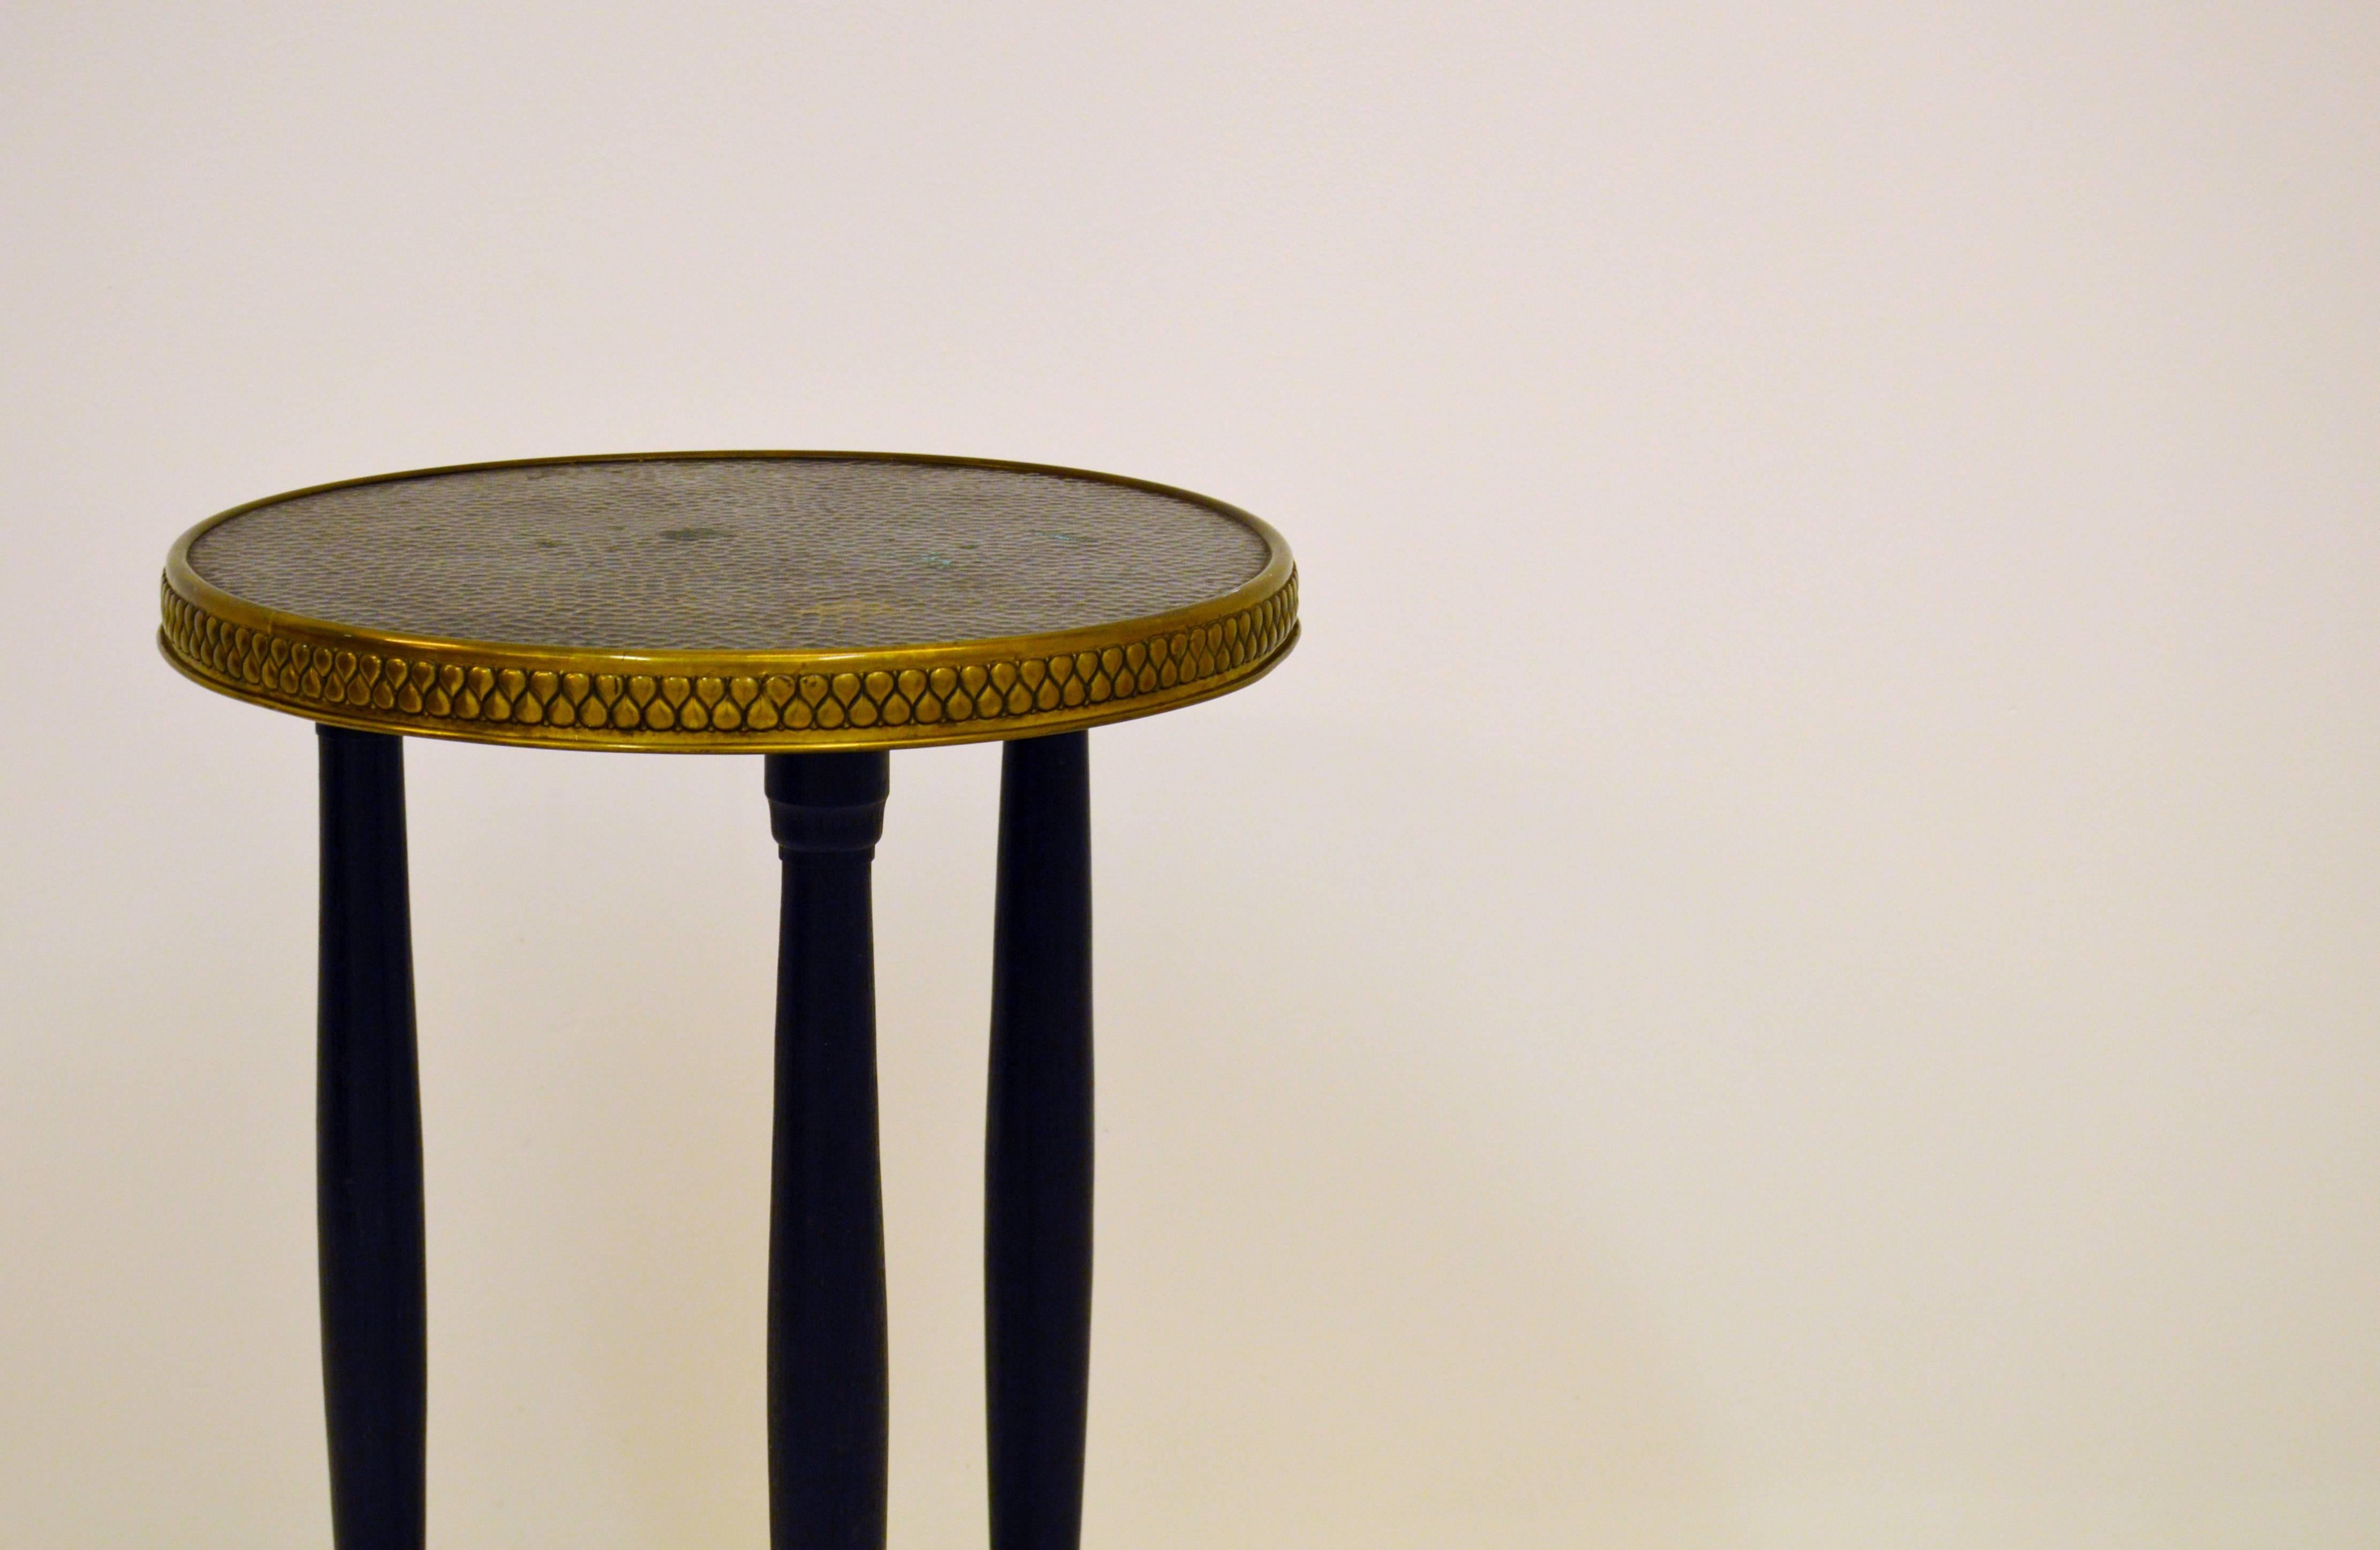 Small and easily placed side table. Stained wood and hammered top of copper with patterned brass edge,
circa 1930s.